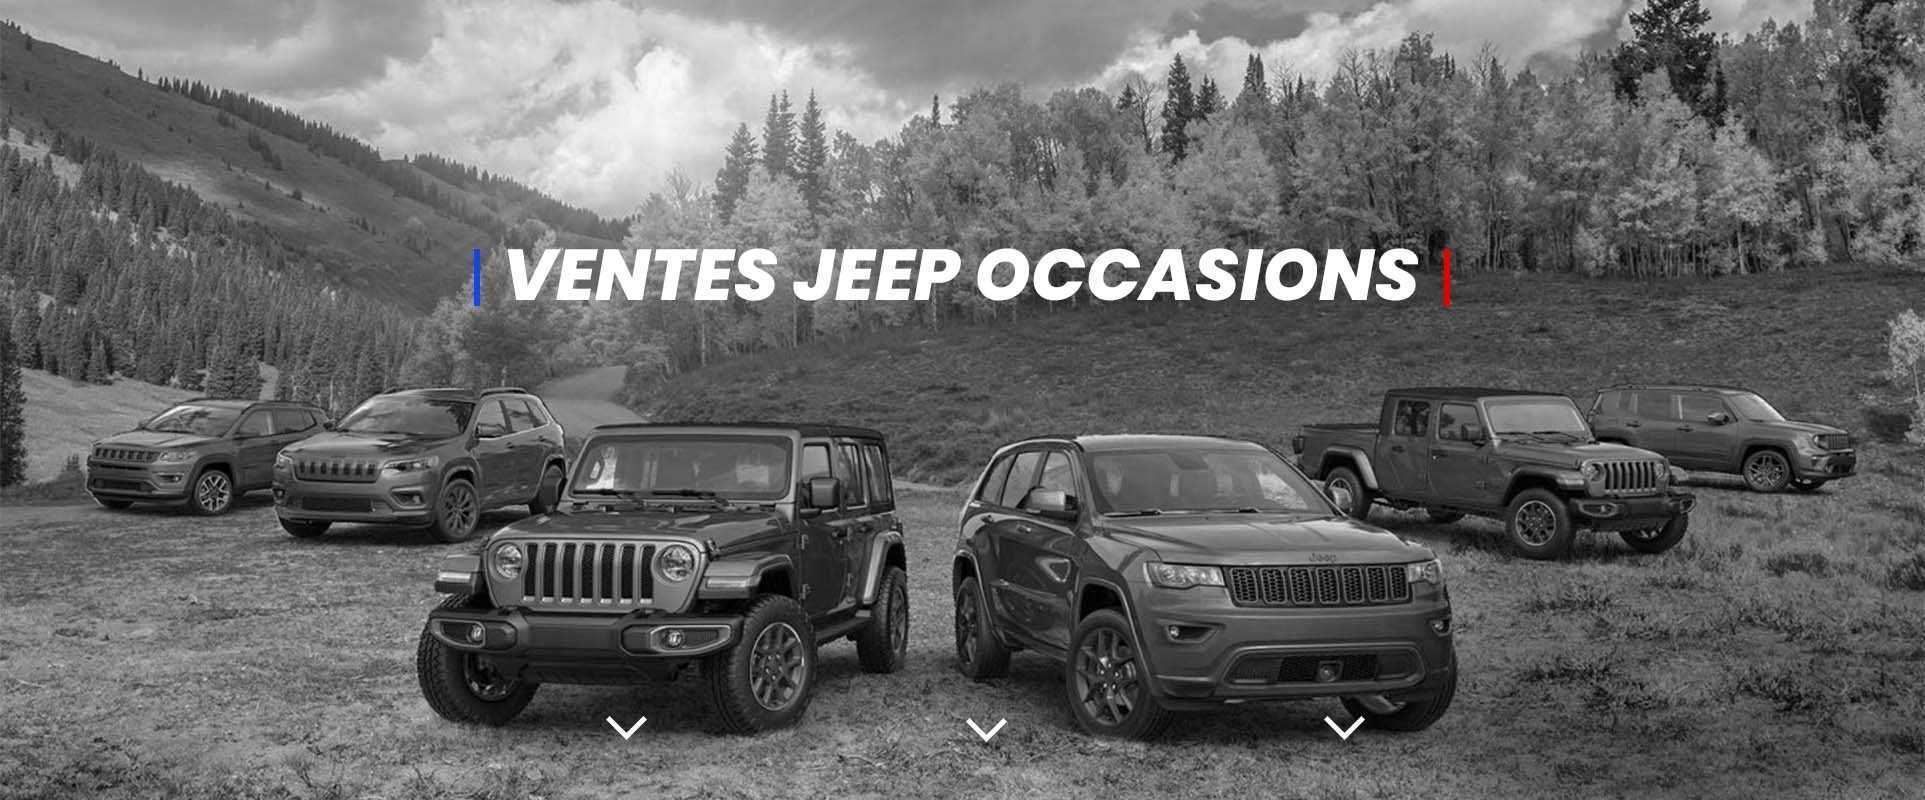 Jeep Occasions